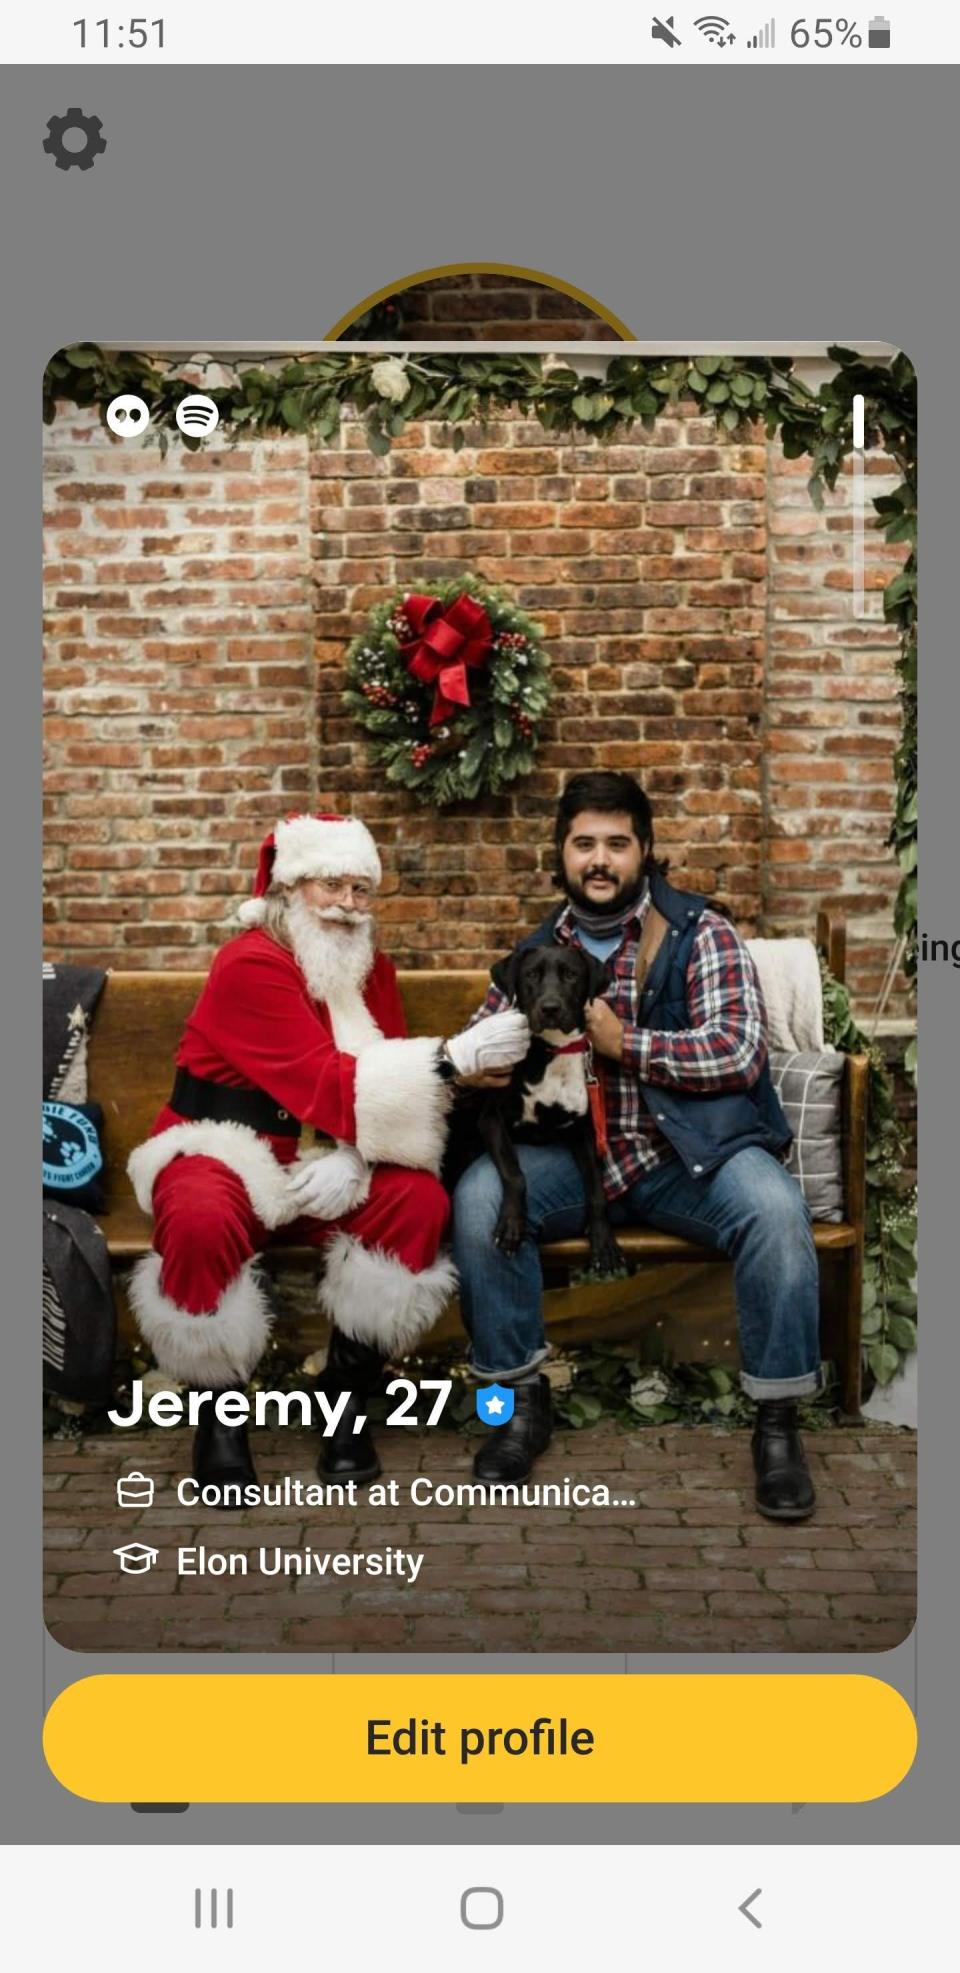 A man dressed as Santa sits with a black dog and a man in plaid.